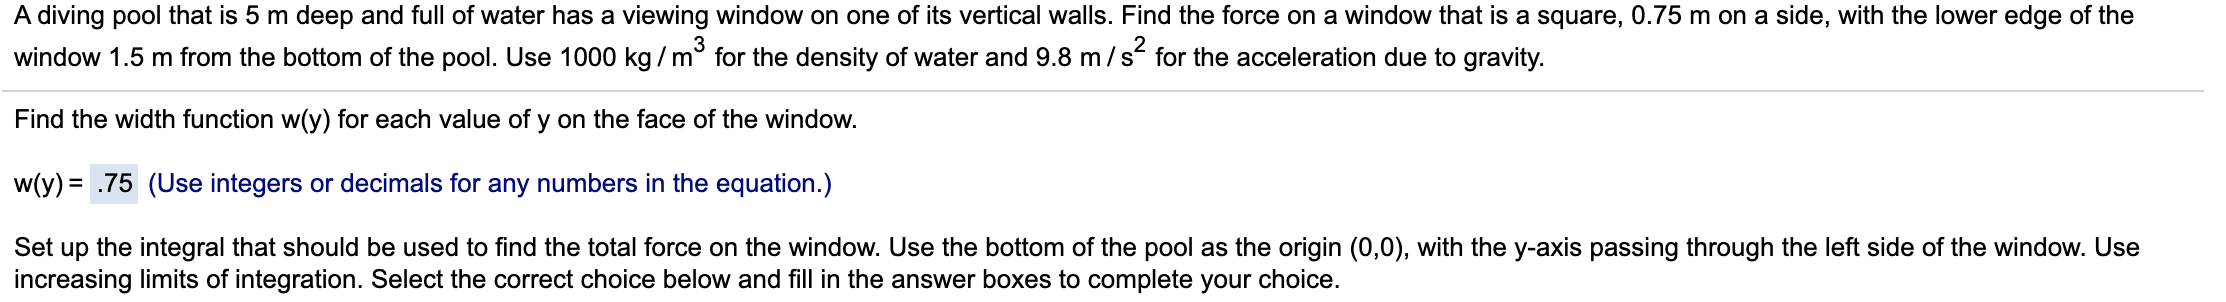 A diving pool that is 5 m deep and full of water has a viewing window on one of its vertical walls. Find the force on a window that is a square, 0.75 m on a side, with the lower edge of the
3
window 1.5 m from the bottom of the pool. Use 1000 kg / m° for the density of water and 9.8 m/s for the acceleration due to gravity.
Find the width function w(y) for each value of y on the face of the window.
w(y) = .75 (Use integers or decimals for any numbers in the equation.)
Set up the integral that should be used to find the total force on the window. Use the bottom of the pool as the origin (0,0), with the y-axis passing through the left side of the window. Use
increasing limits of integration. Select the correct choice below and fill in the answer boxes to complete your choice.
